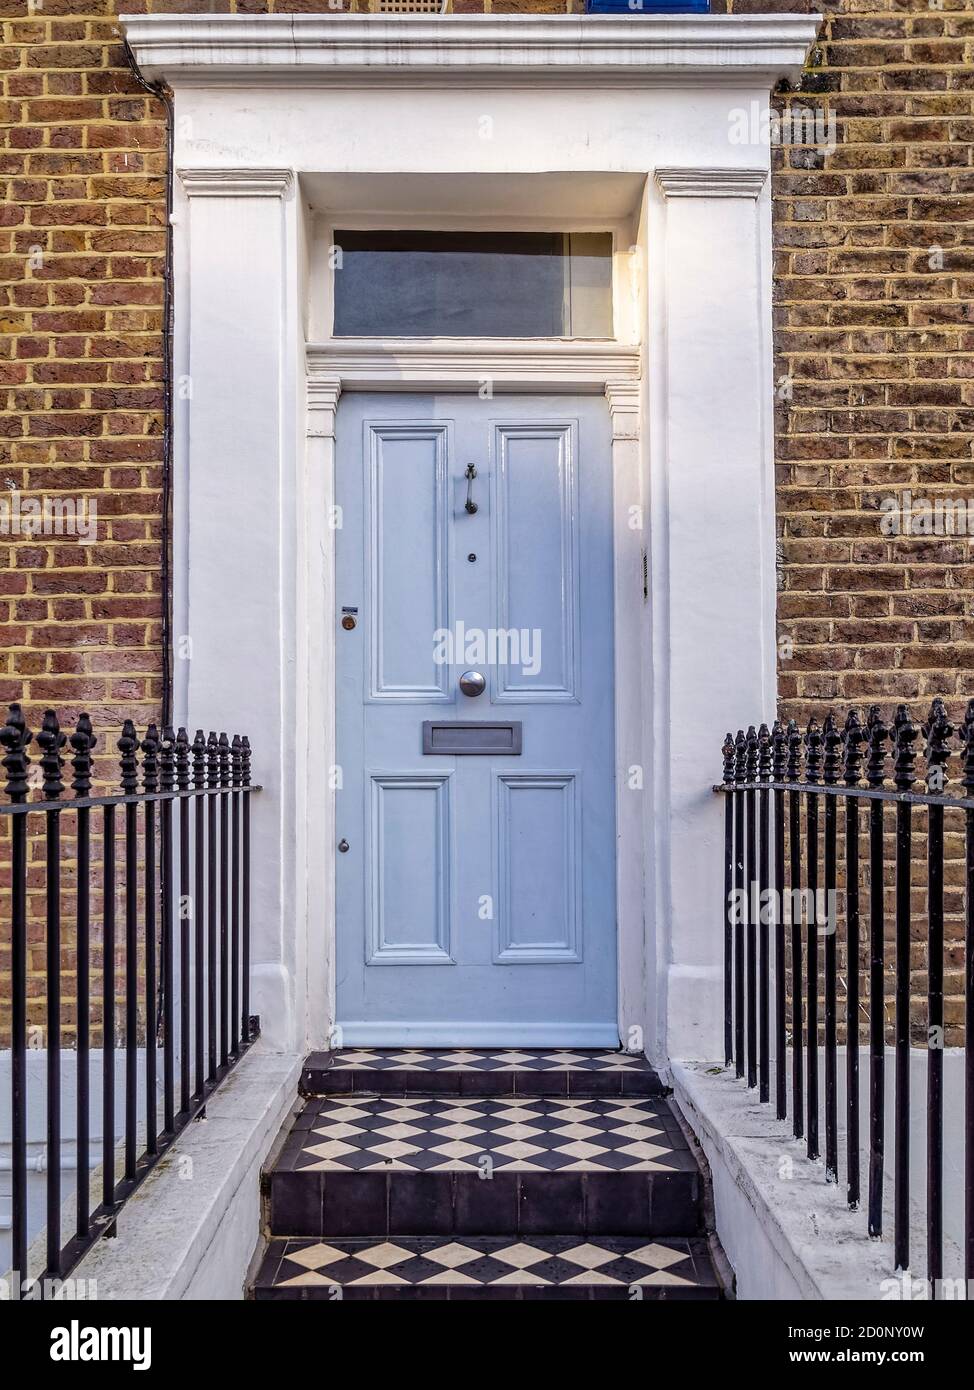 A classic London house with light blue-grey doors in Notting Hill. With a white frame against the dark brown brick wall and the chess board pavement. Stock Photo